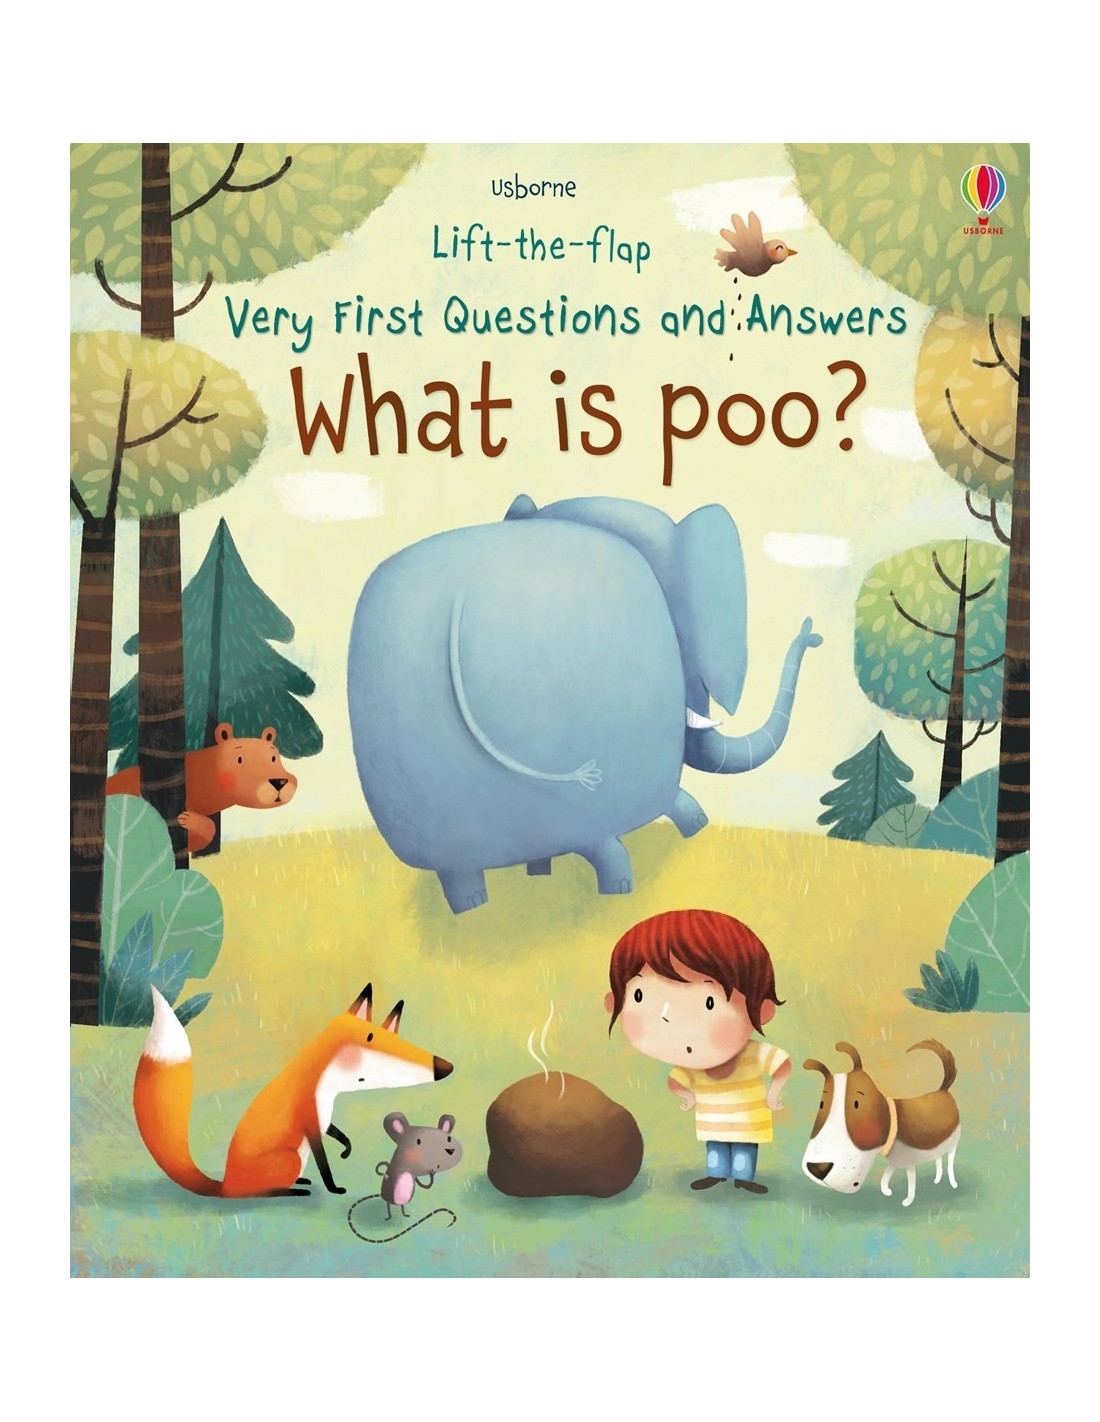 What is poo?